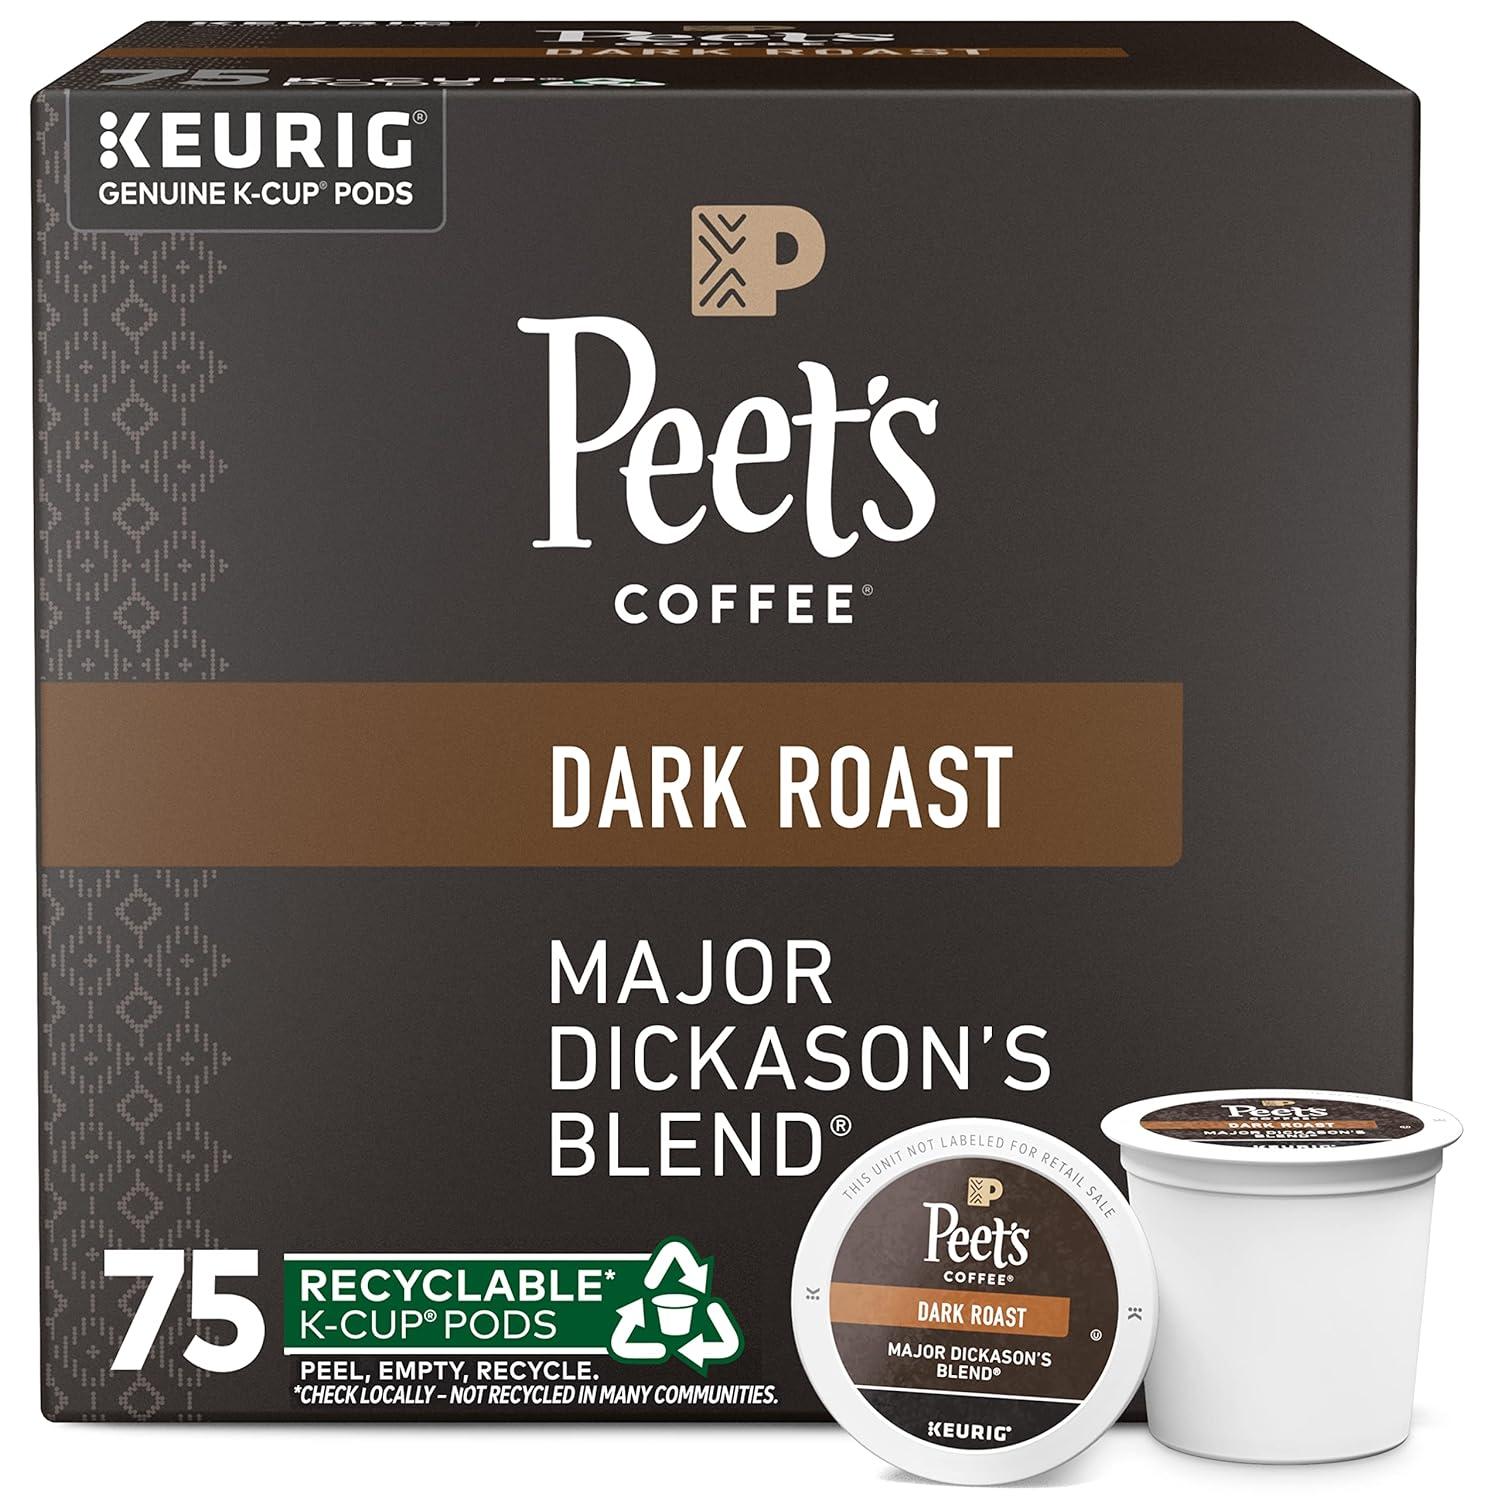 Peets Coffee Major Dickasons Blend K-Cup Coffee Pods 75 Pack for $23.99 Shipped